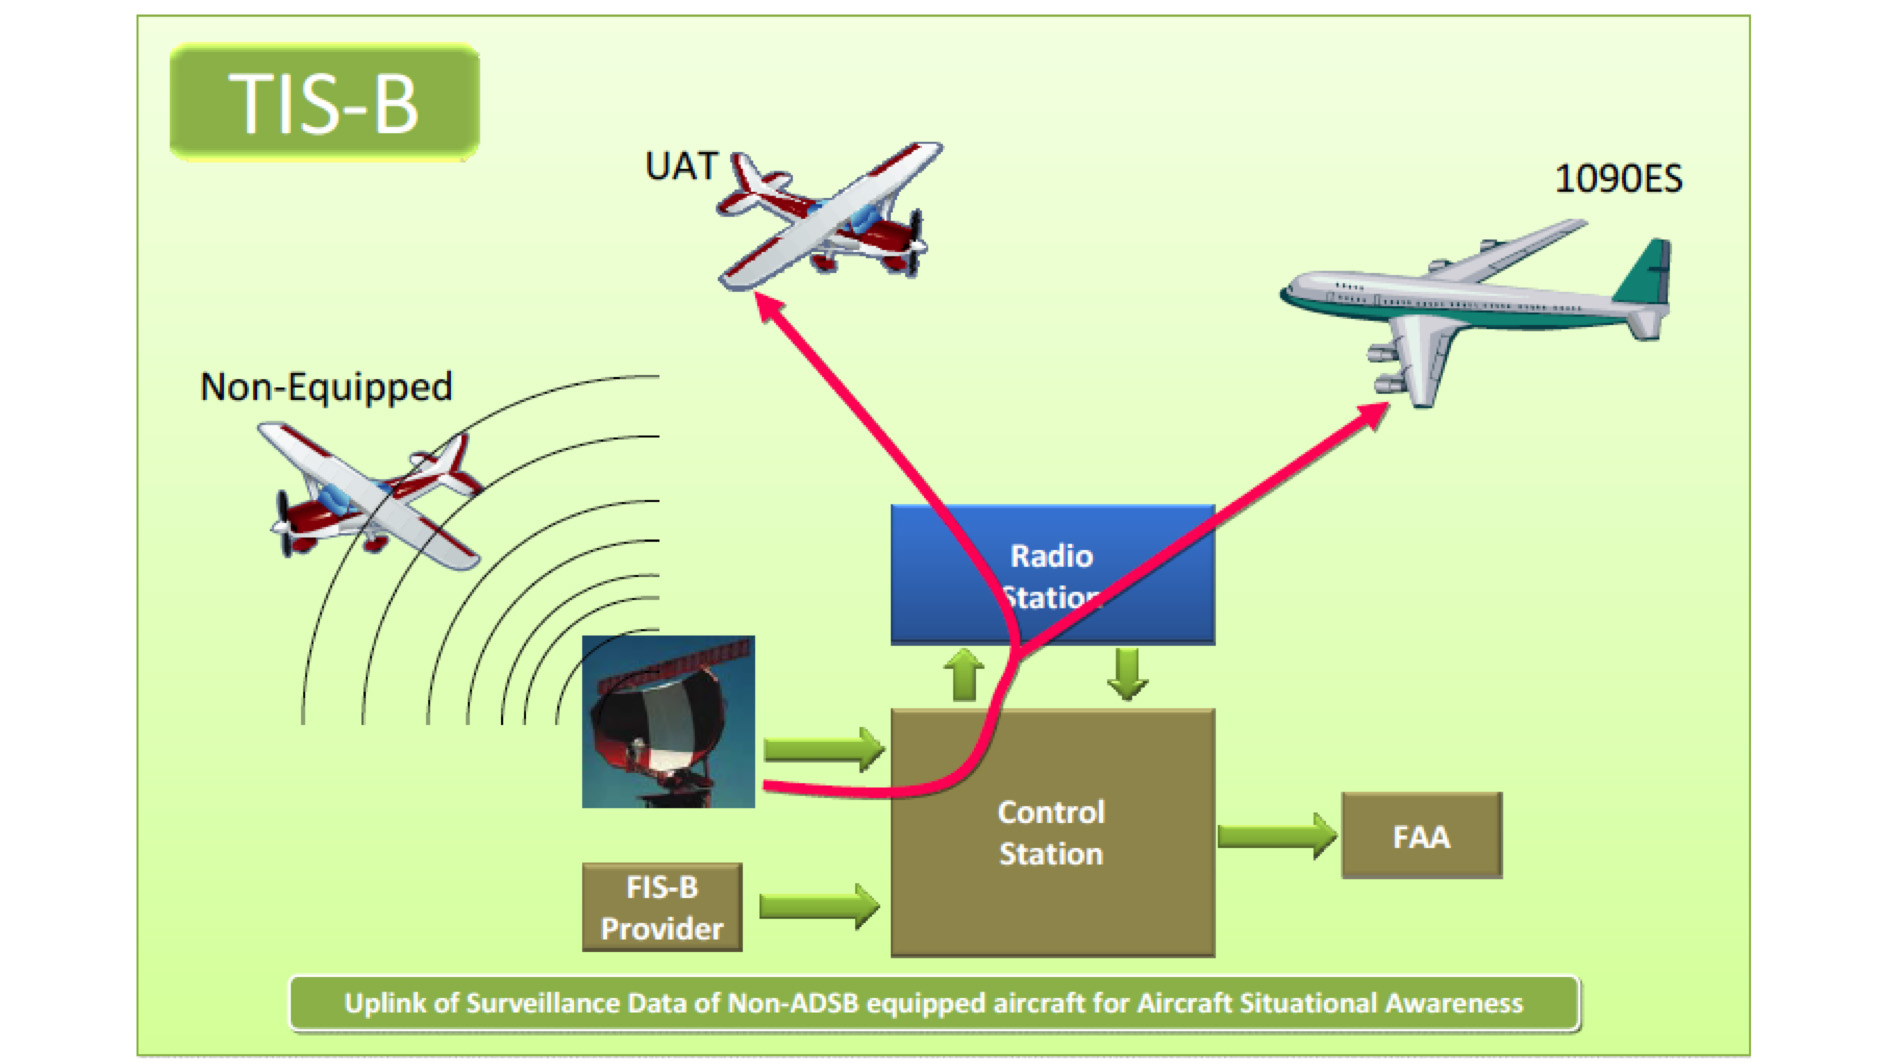 Uplink of surveillance data of non-ADS-B equipped aircraft for aircraft situational awareness. Image courtesy Jeff Simon.